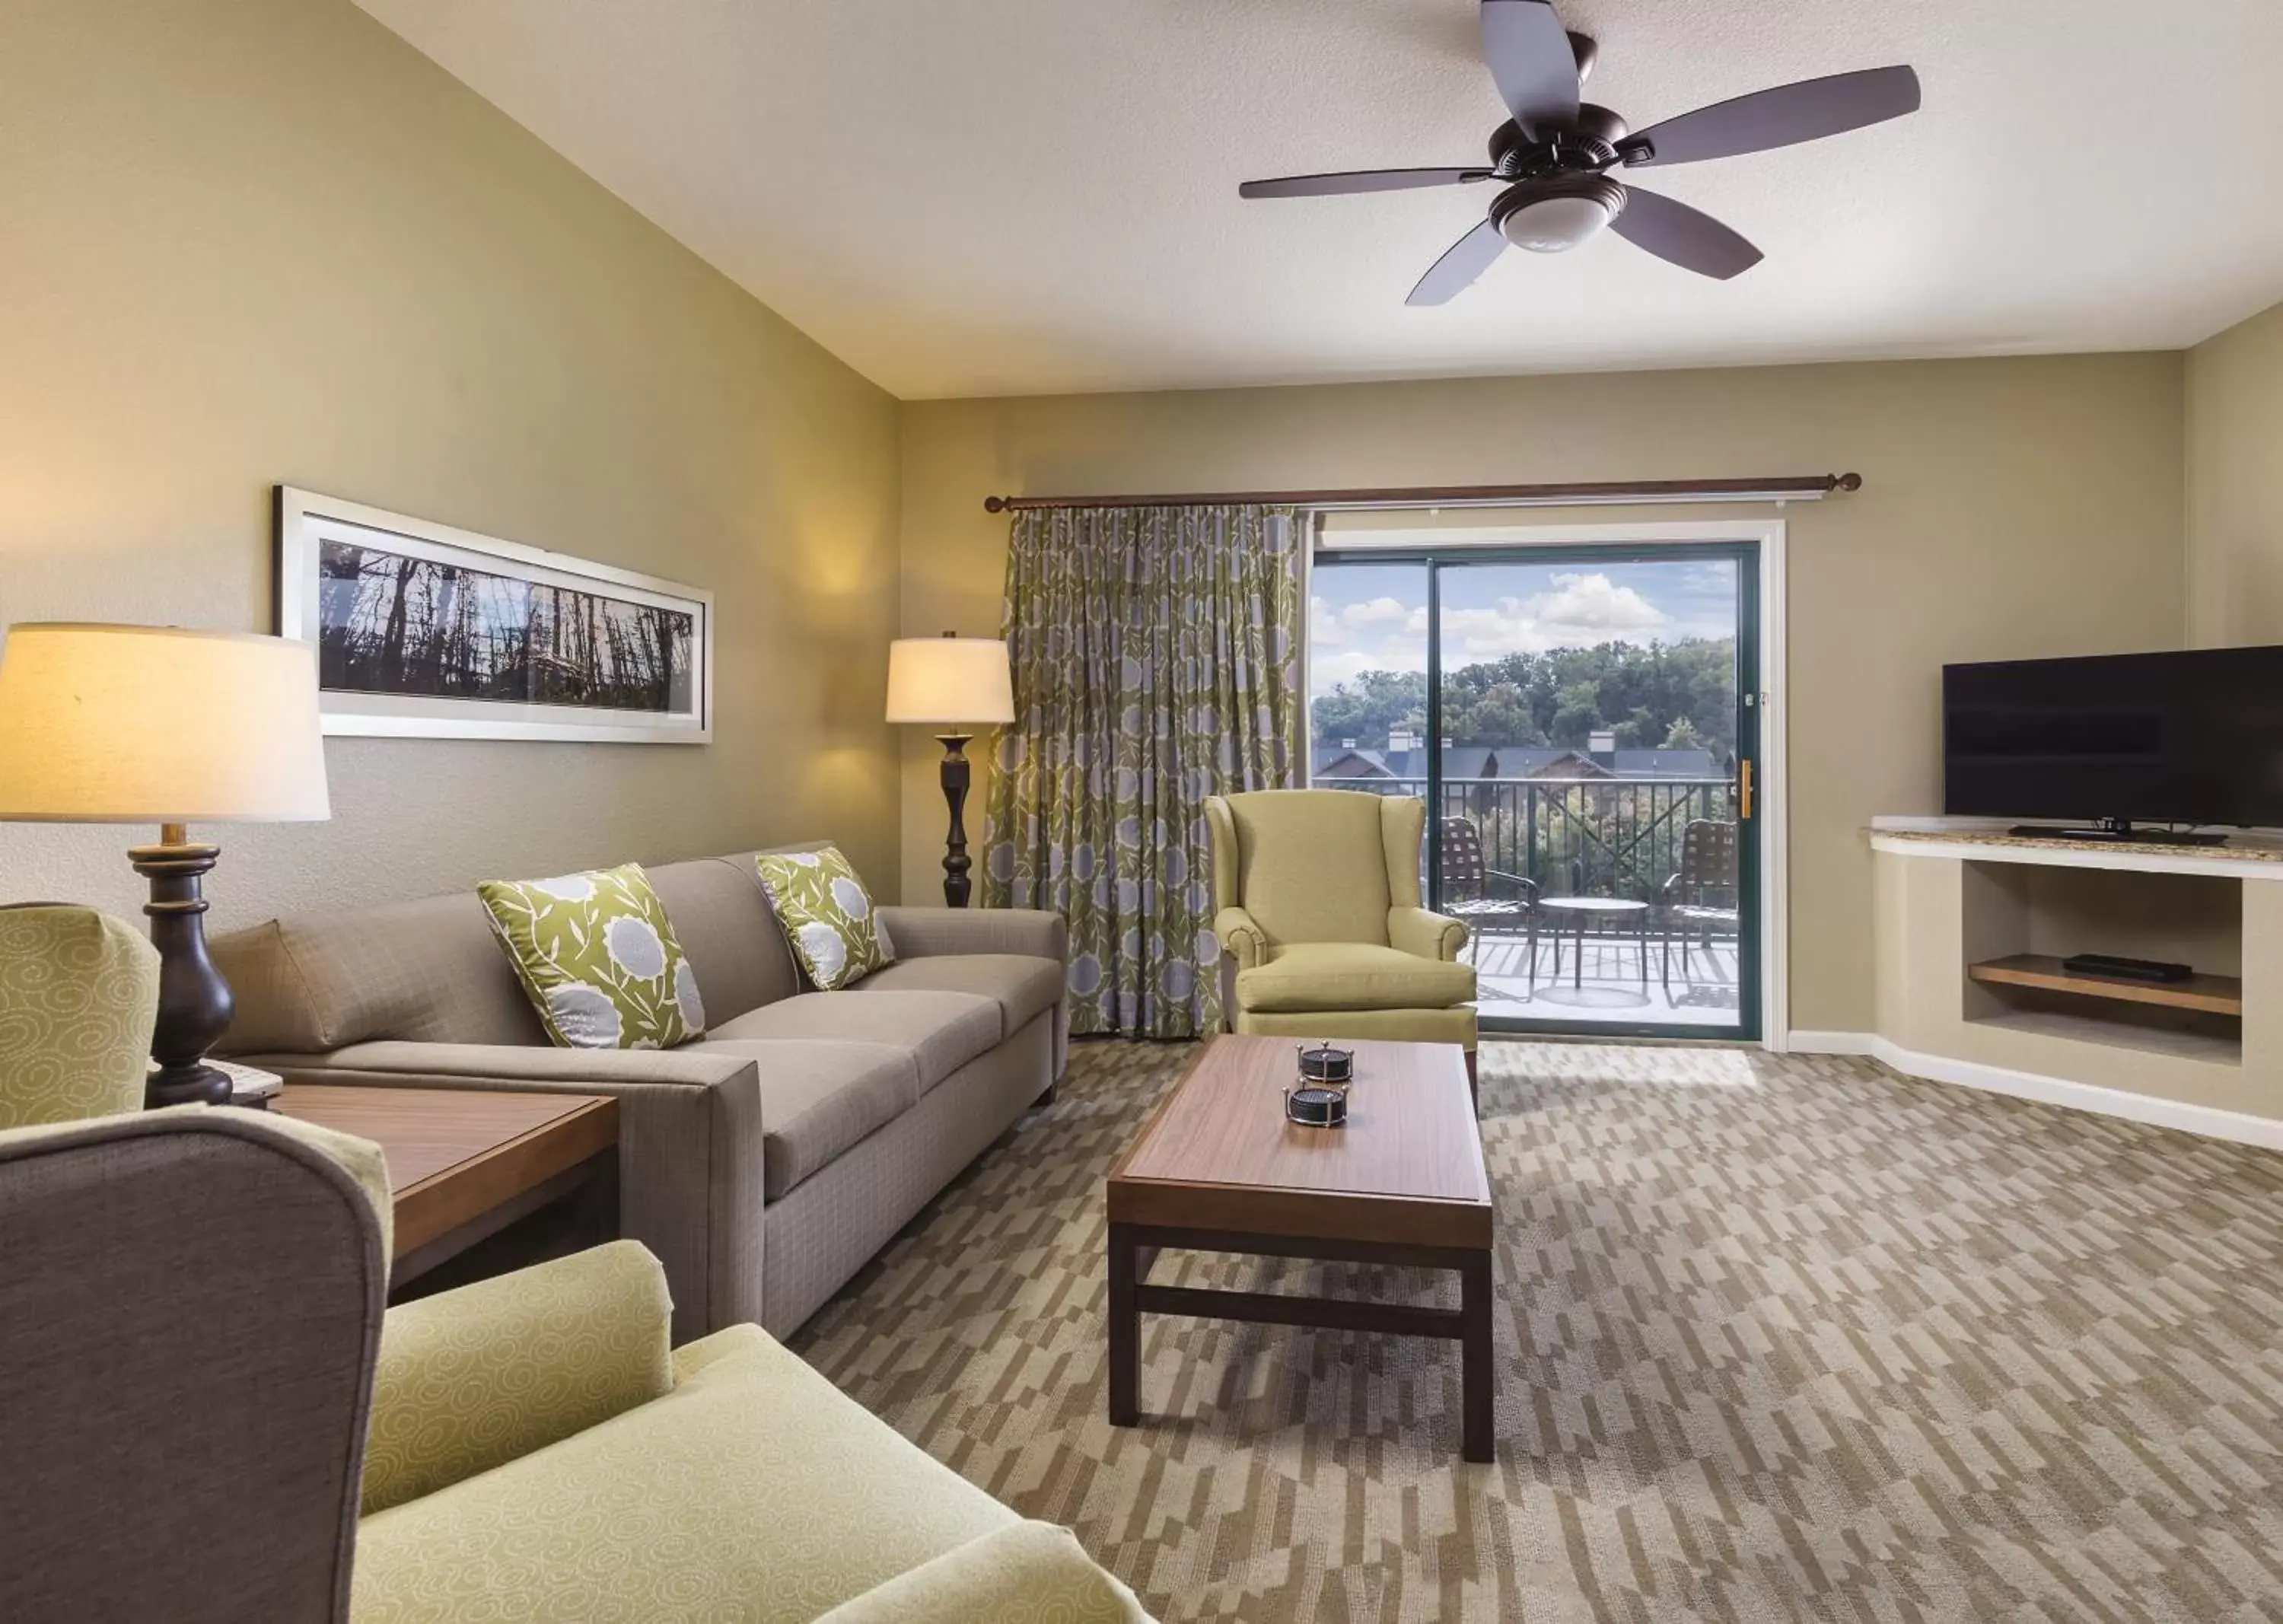 Two-Bedroom Apartment in Club Wyndham Smoky Mountains